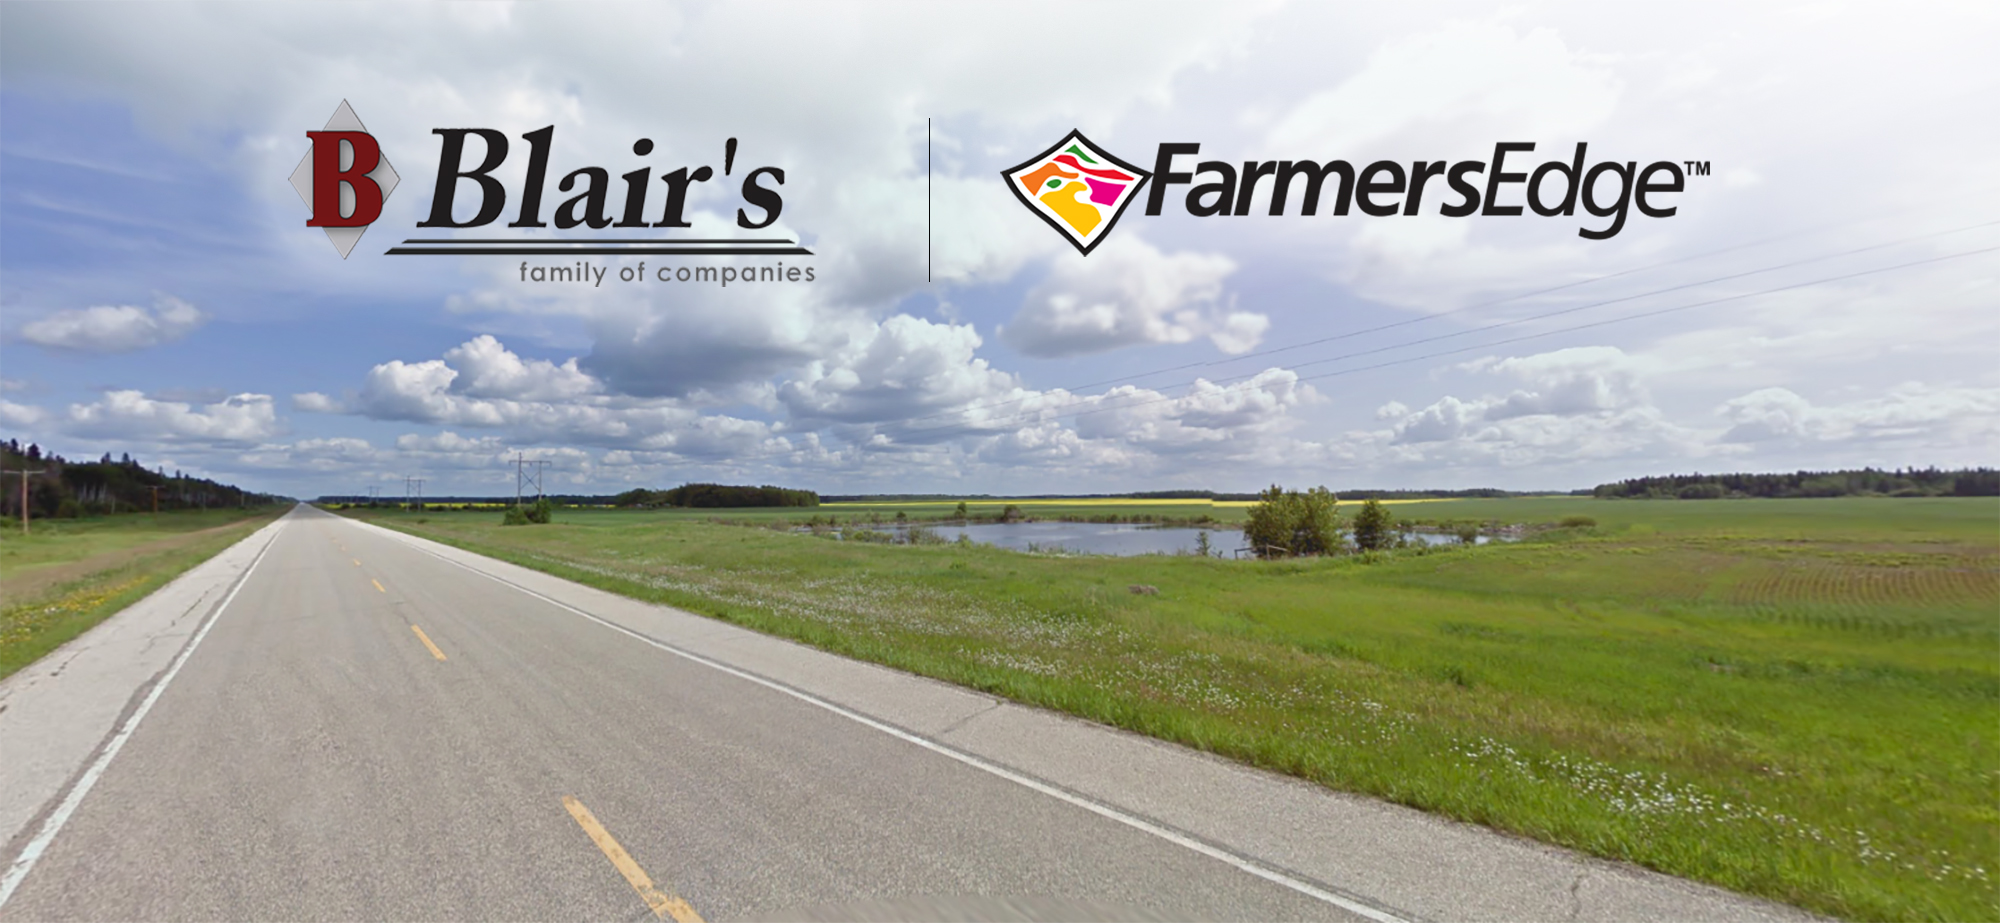 Farmers Edge and Blair’s Family of Companies Partner to Help Saskatchewan Growers Boost ROI with Decision-Support Data